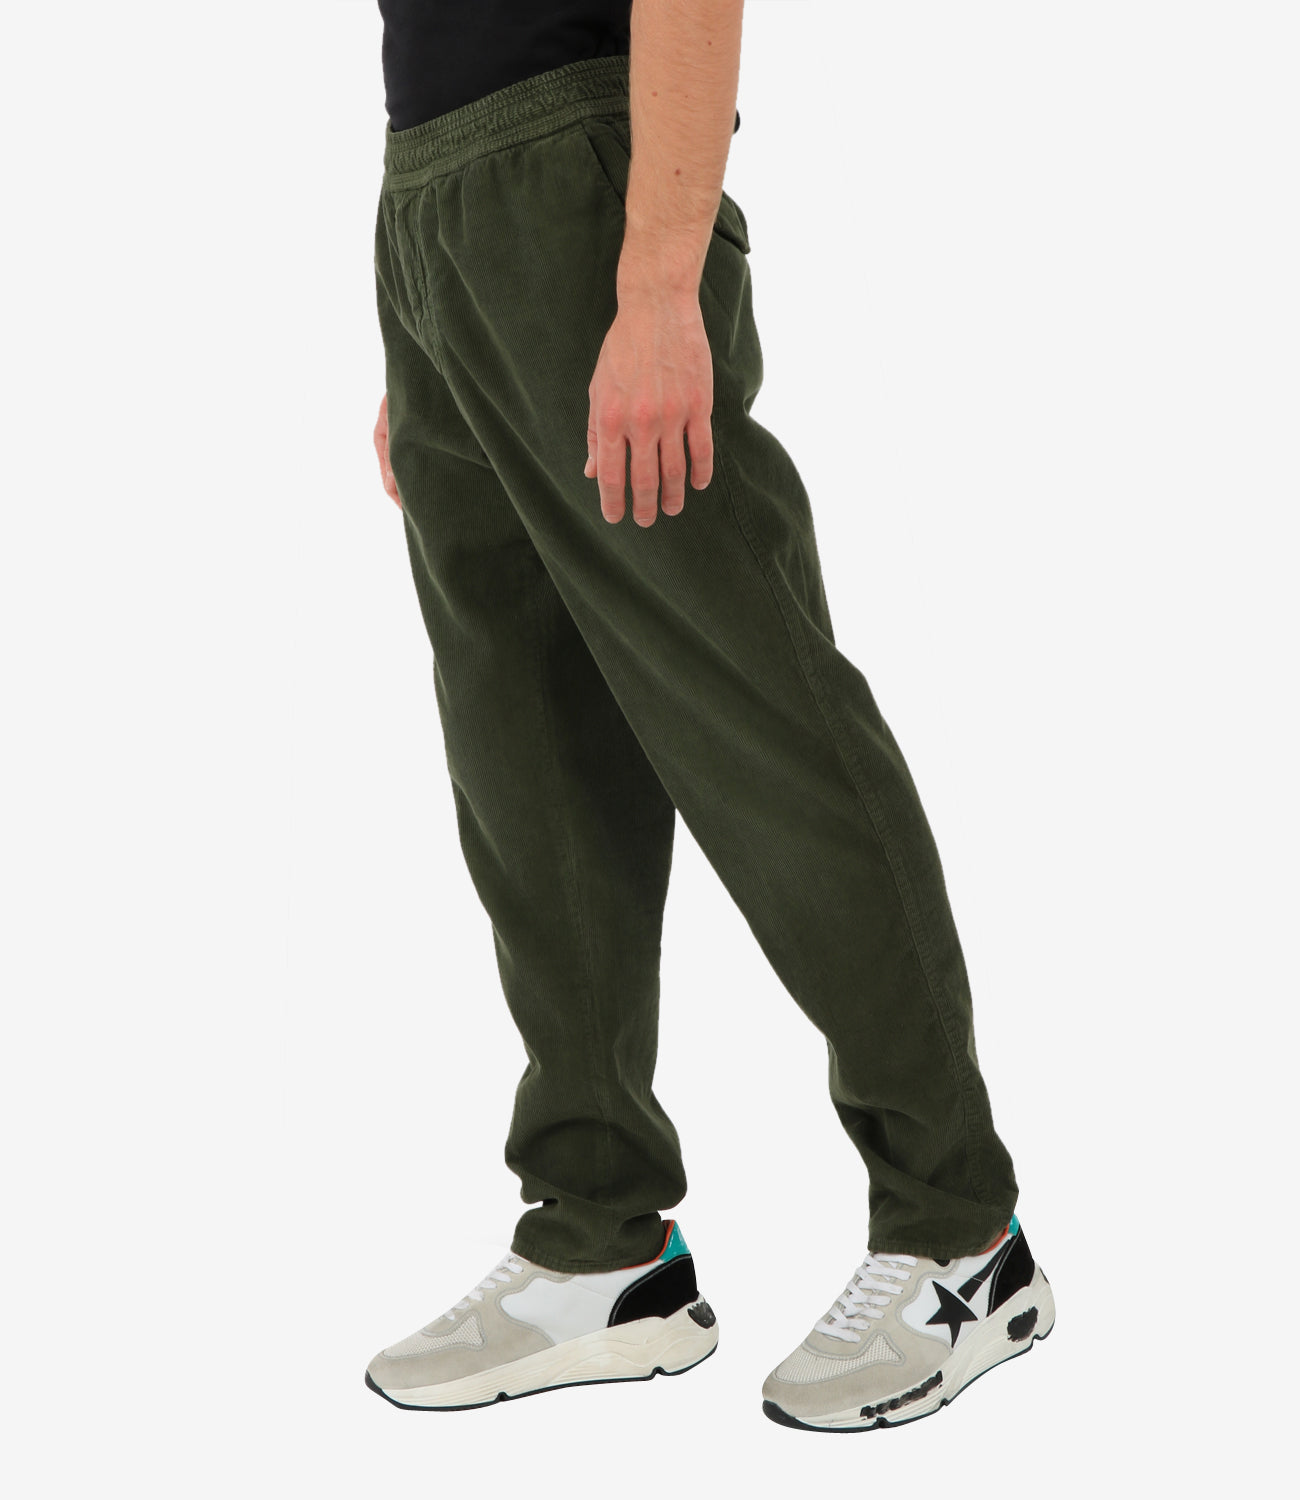 Amos Golden Goose Deluxe Brand Military Green Trousers